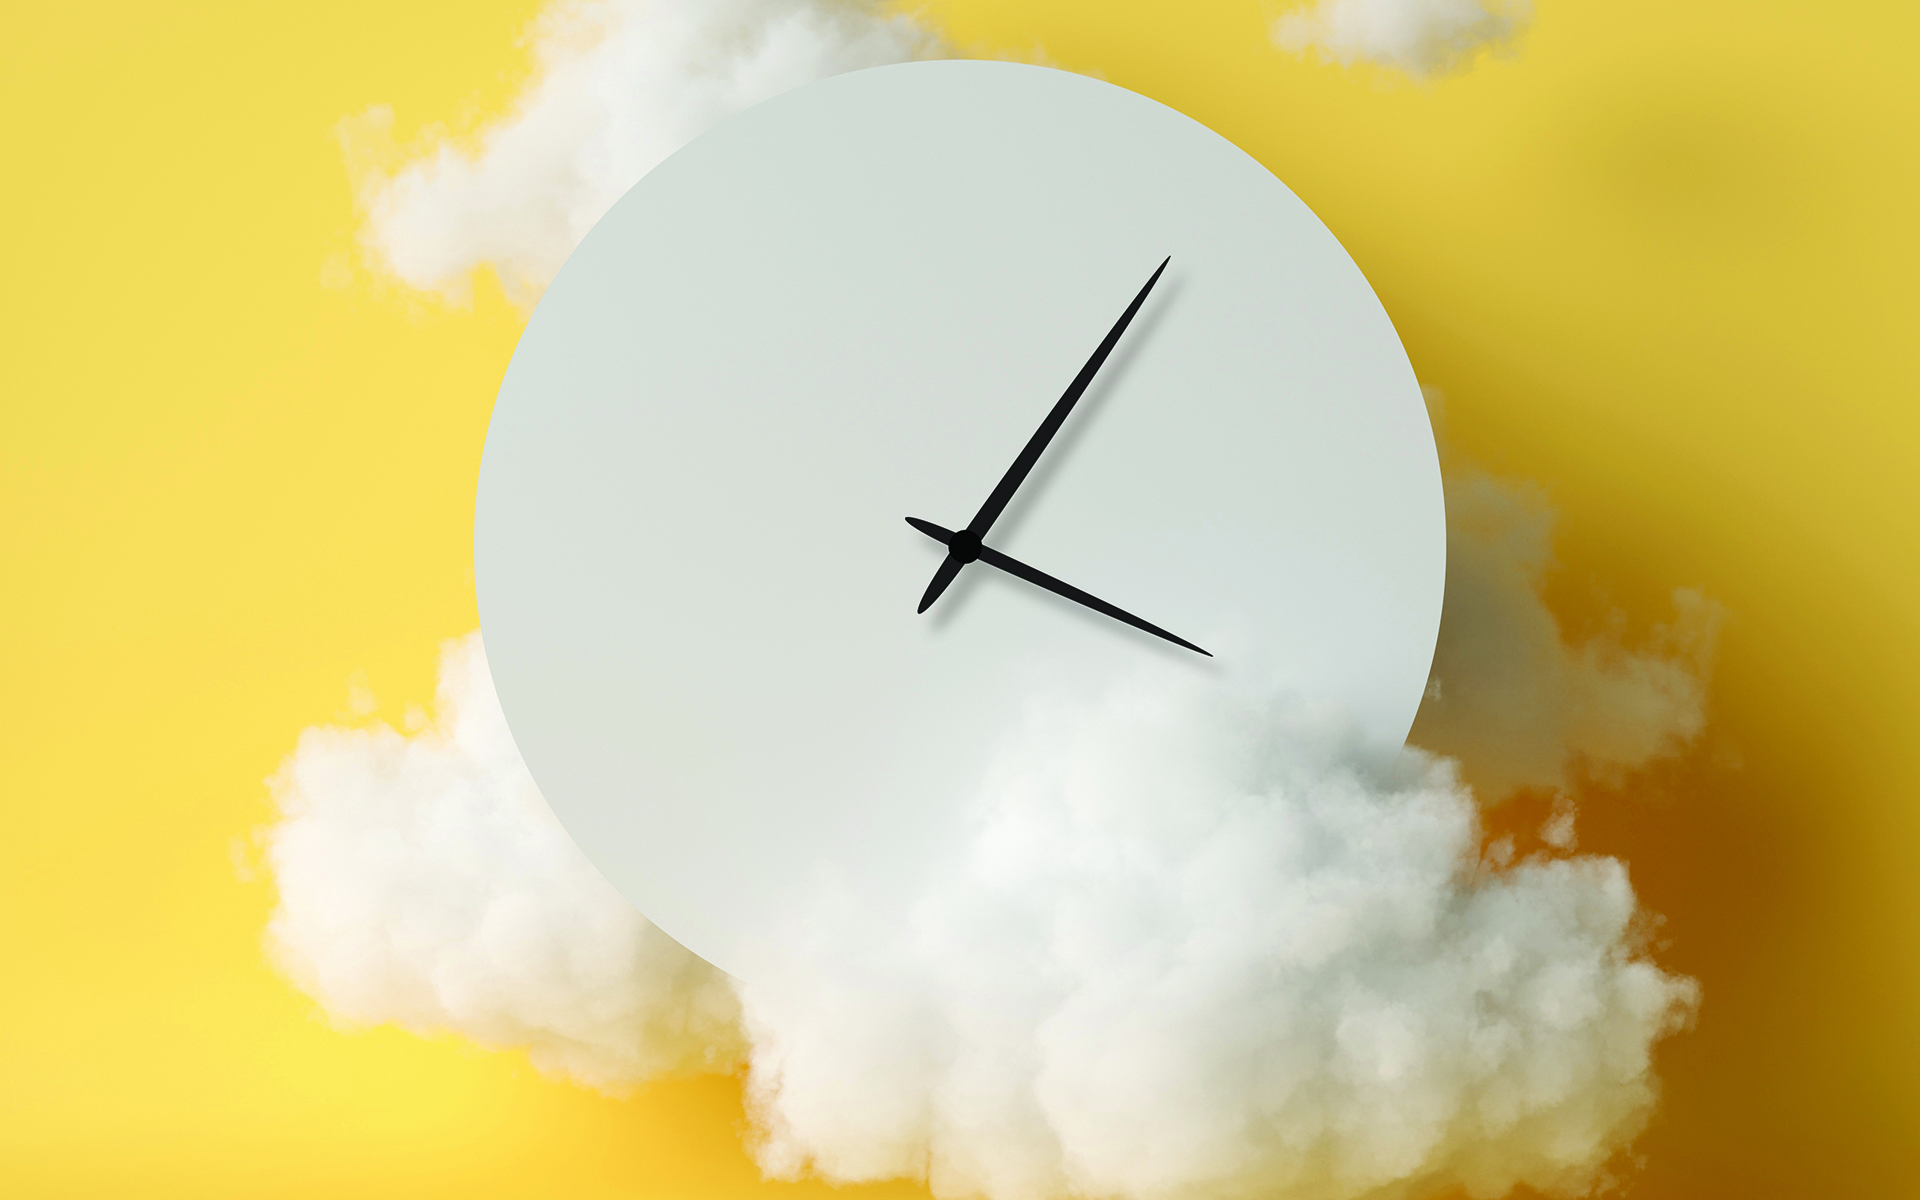 The Science of Deep Sleep - Clock amidst fluffy clouds on a yellow background